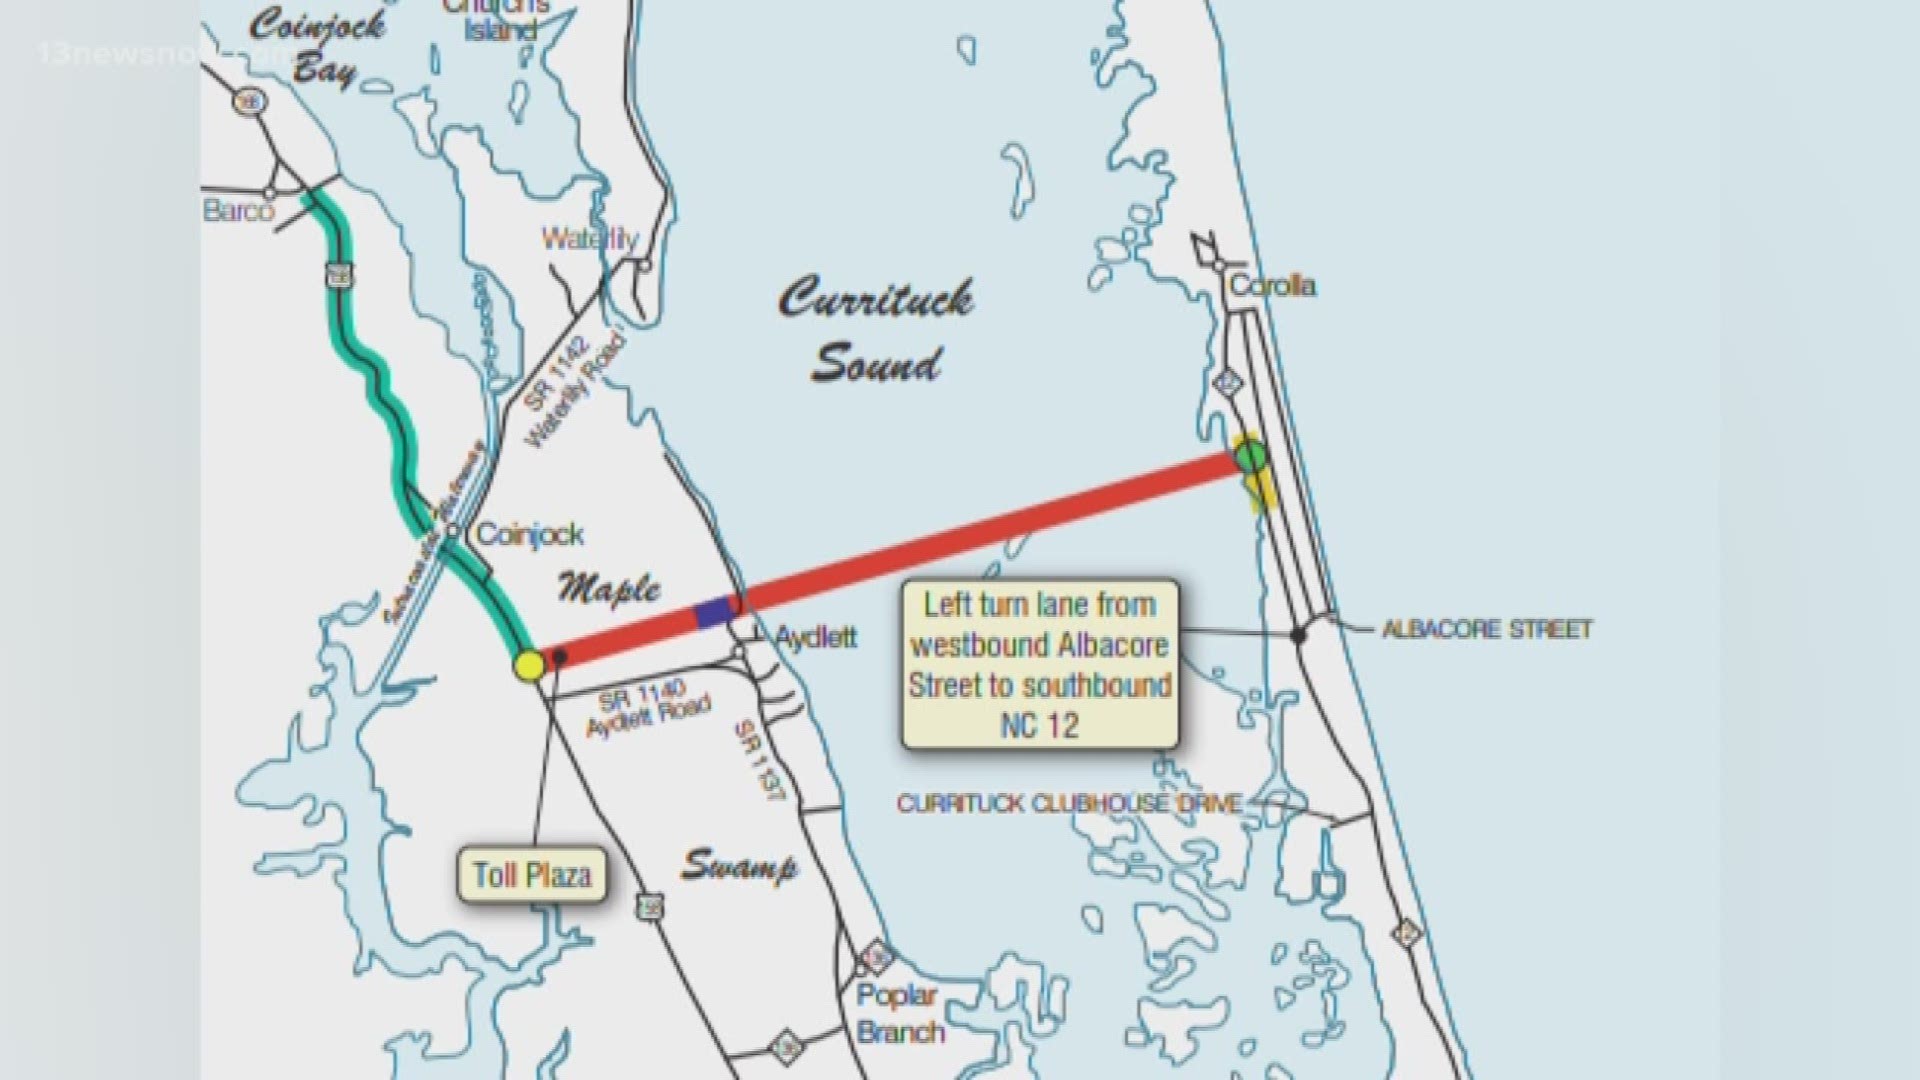 Currituck County leaders aren't backing off plans for a new "Mid-Currituck Bridge," despite a lawsuit.